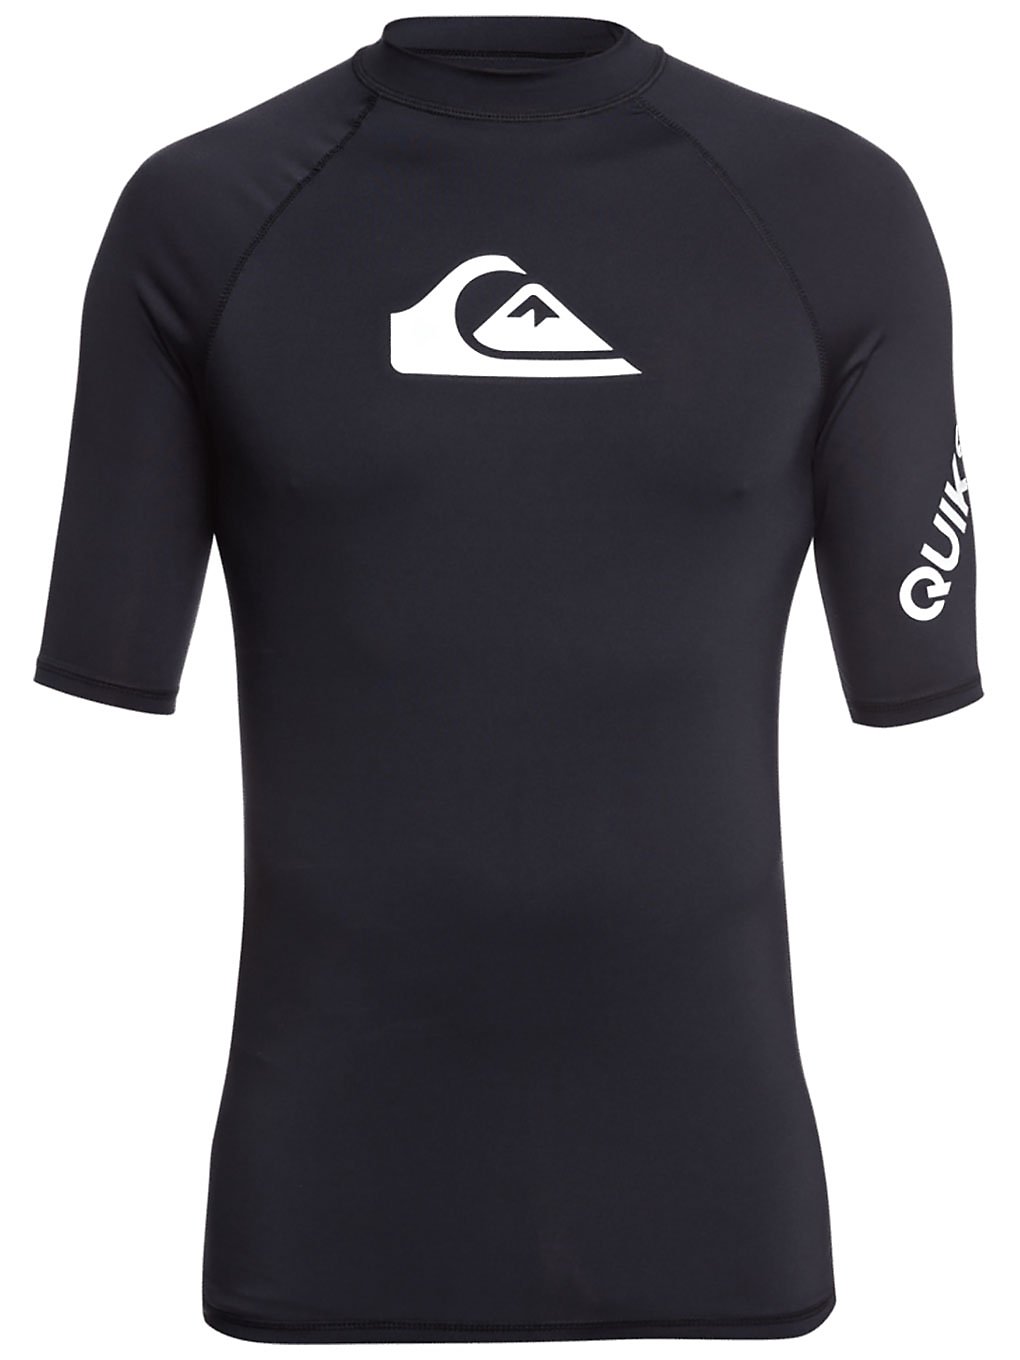 Quiksilver All Time Lycra black